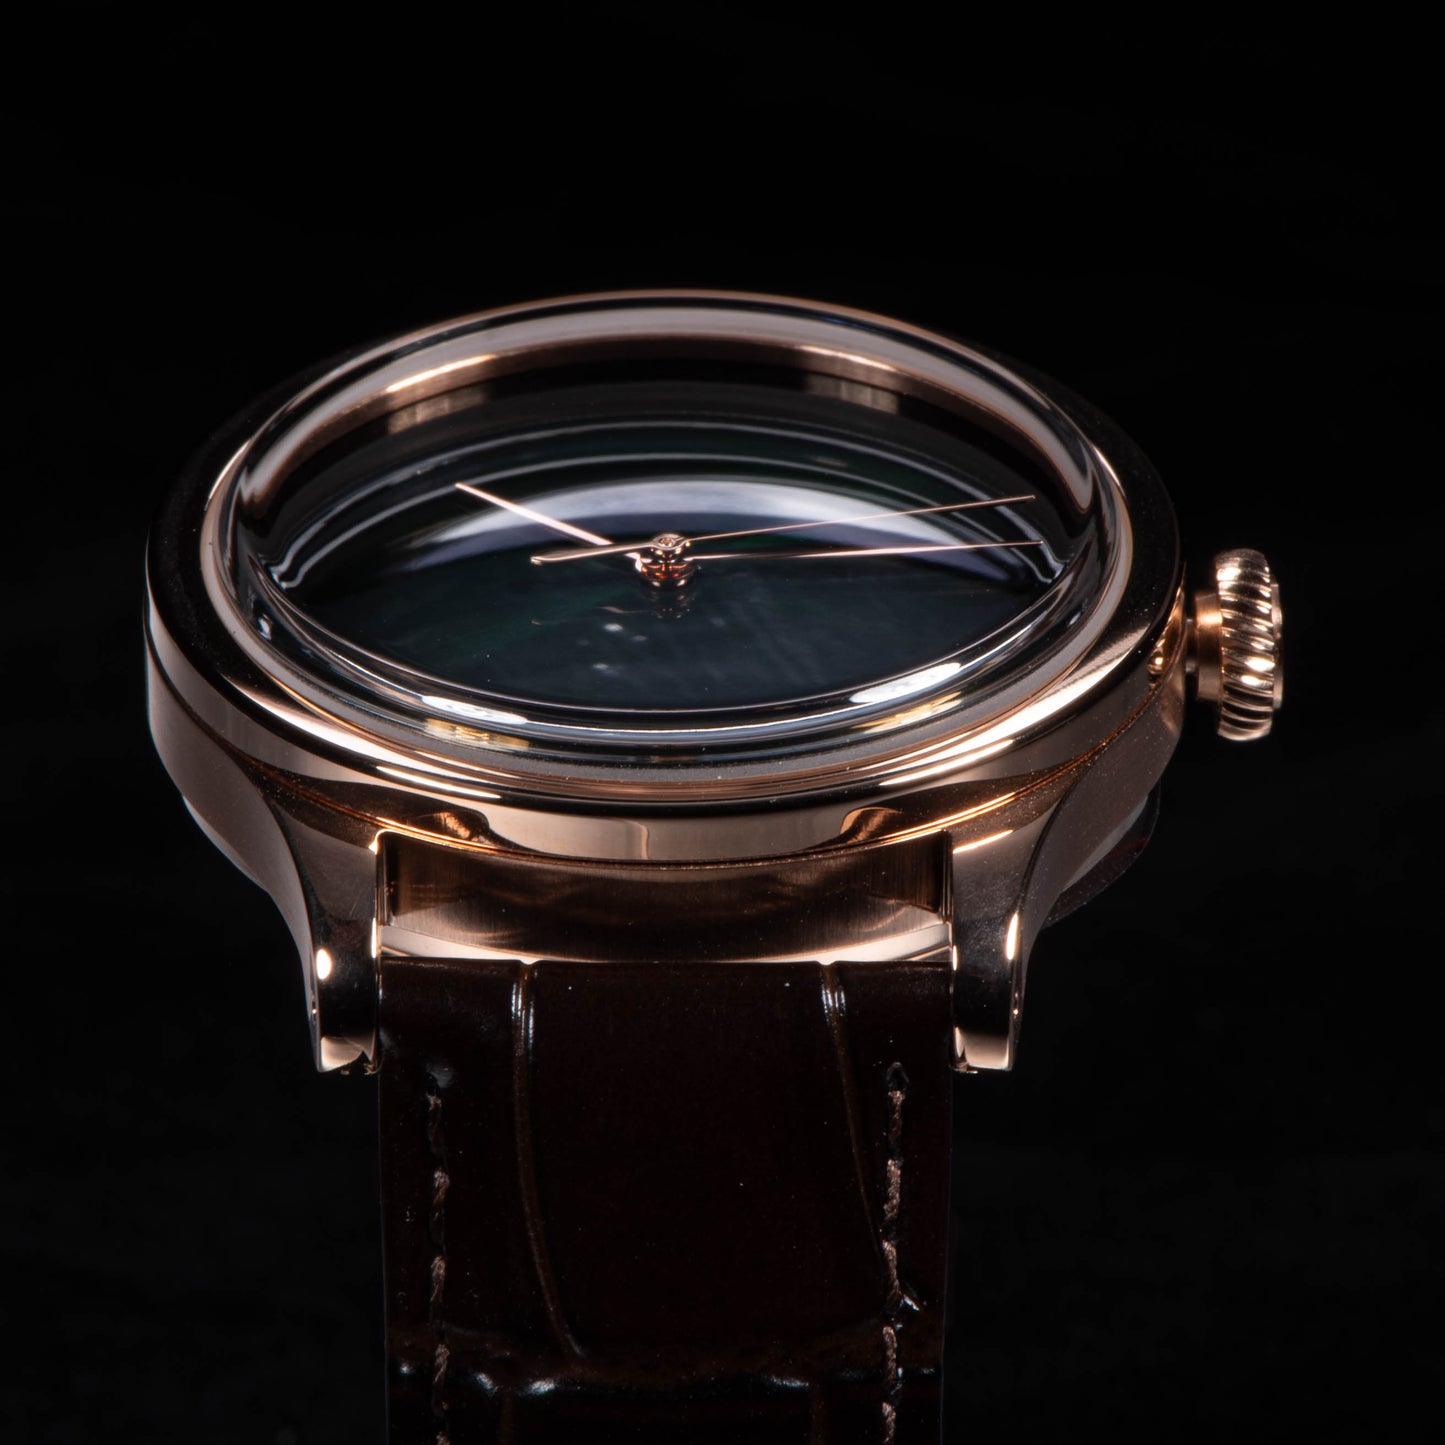 Heritage 411-3A Seagull 2130 Movement Rose Gold Case Blue Dial SU4113RBL